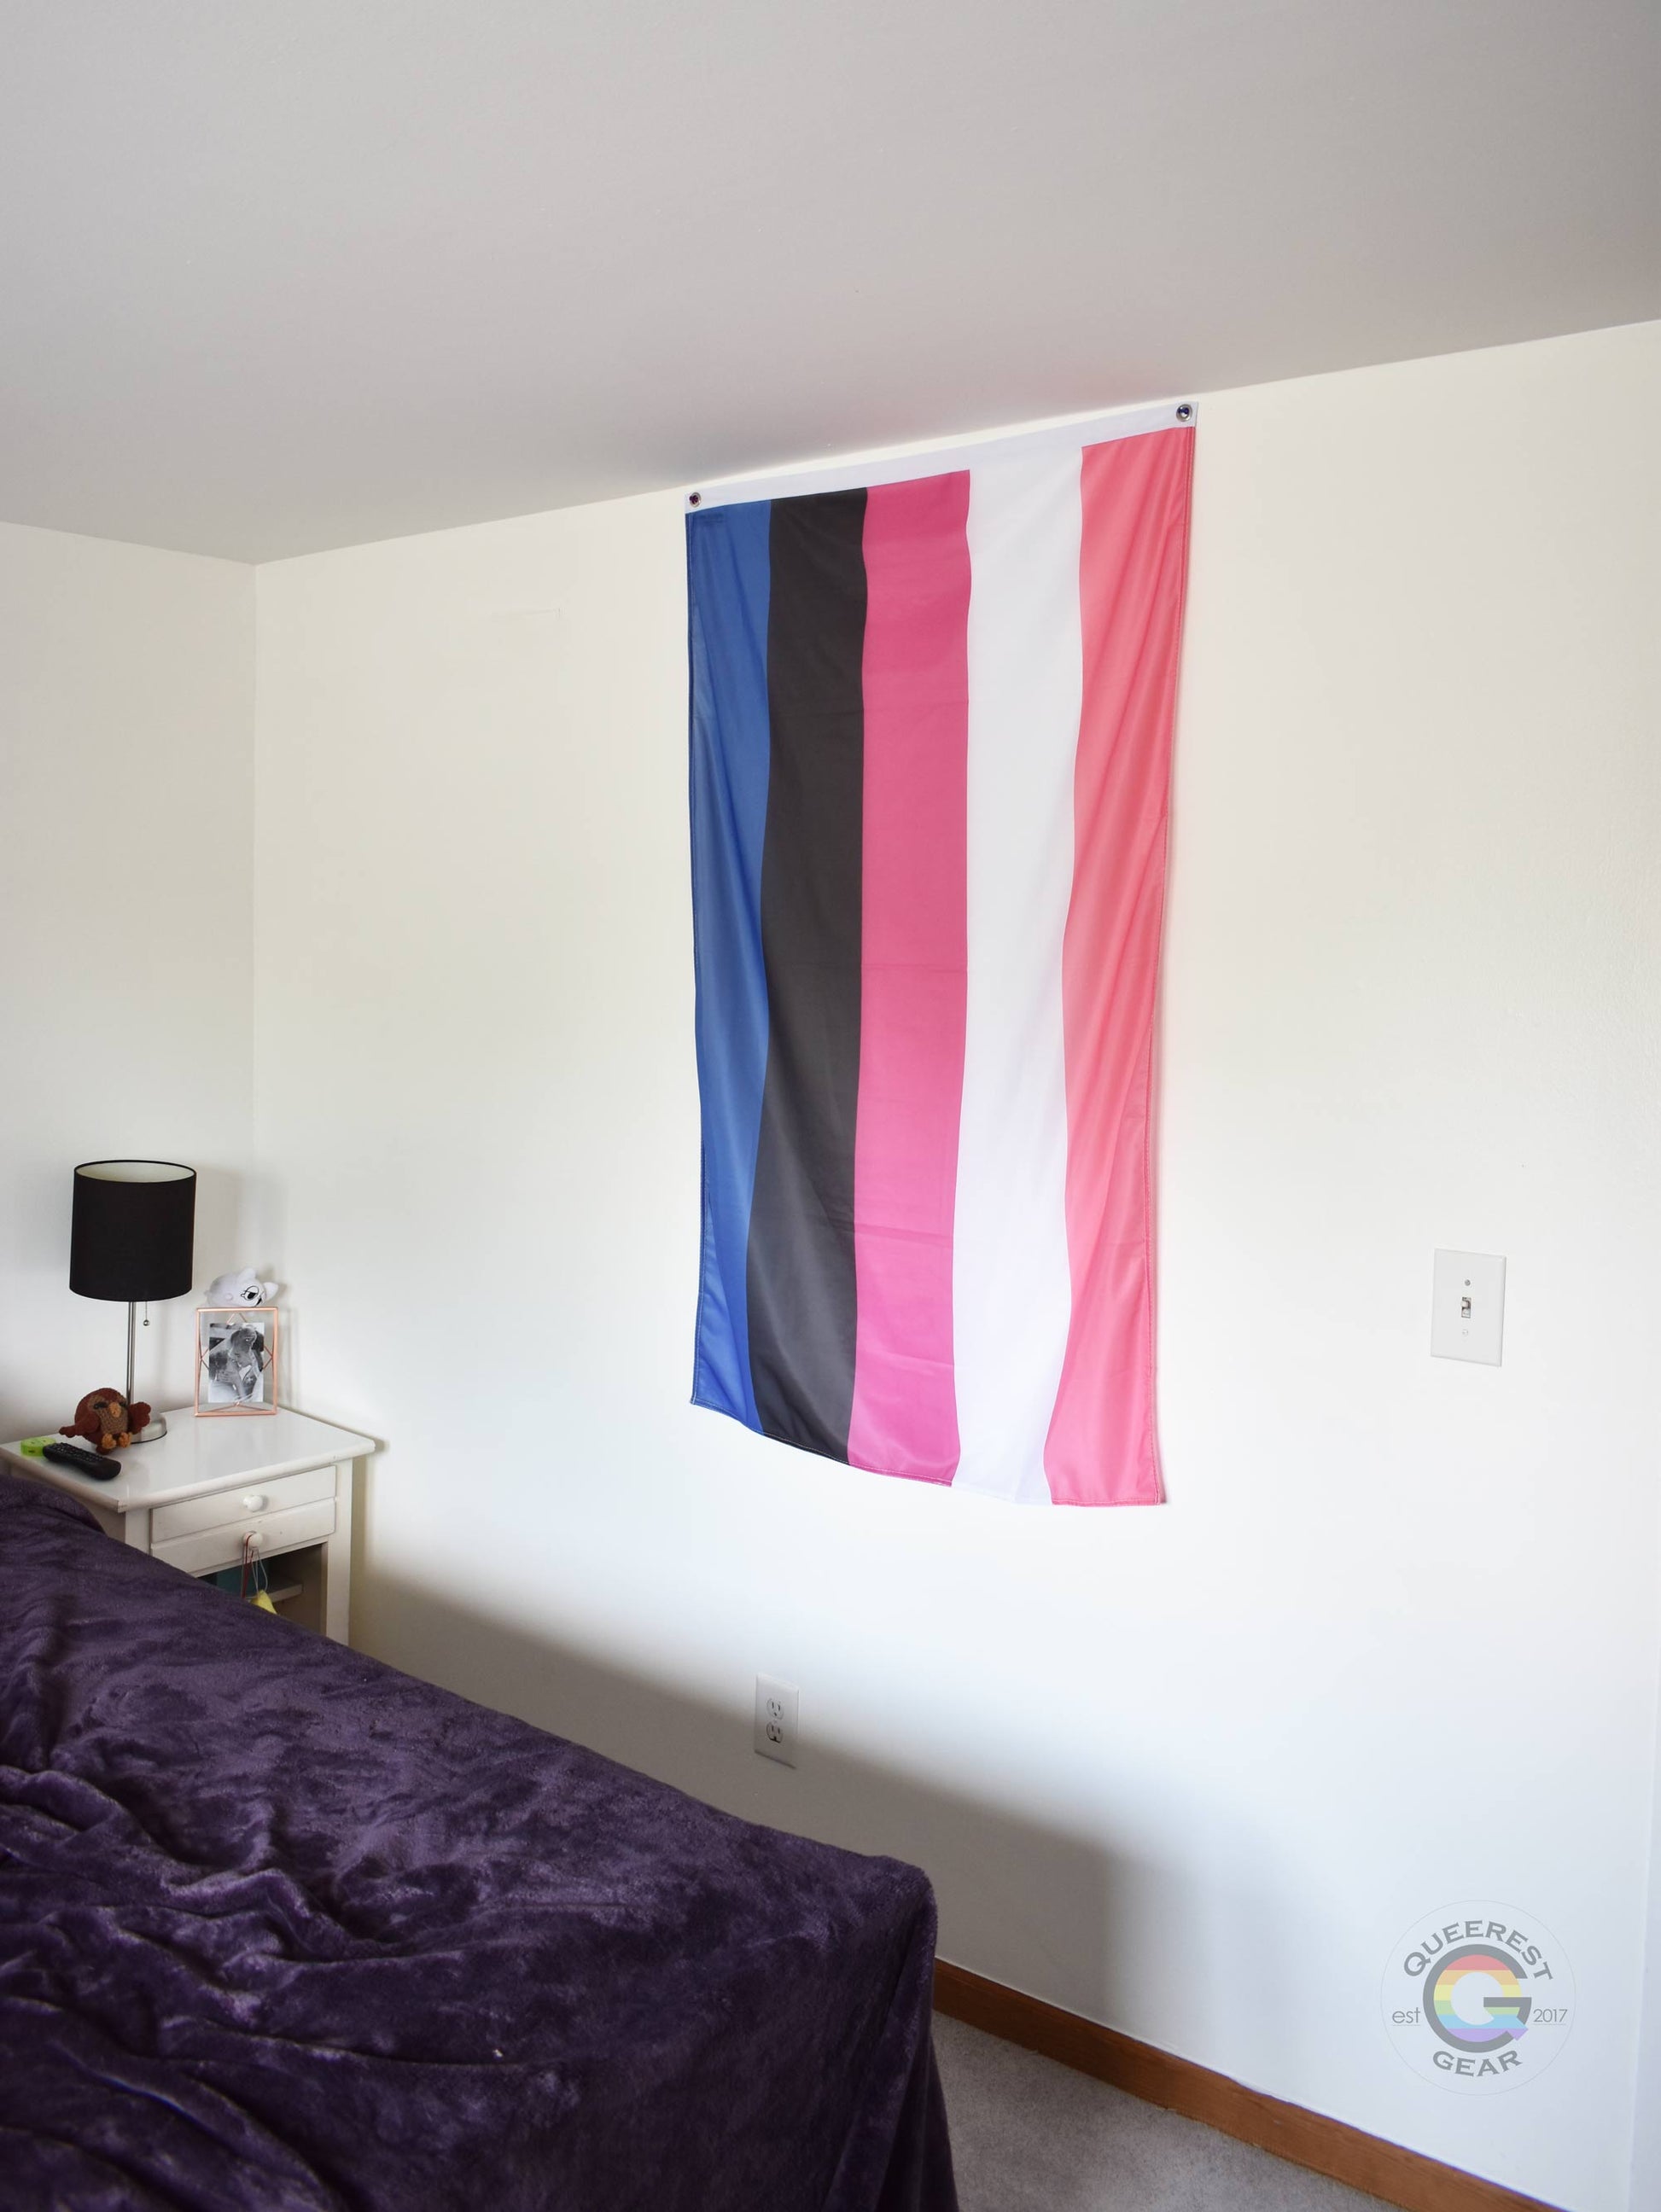  3’x5’ genderfluid flag hanging vertically on the wall of a bedroom with a nightstand and a bed